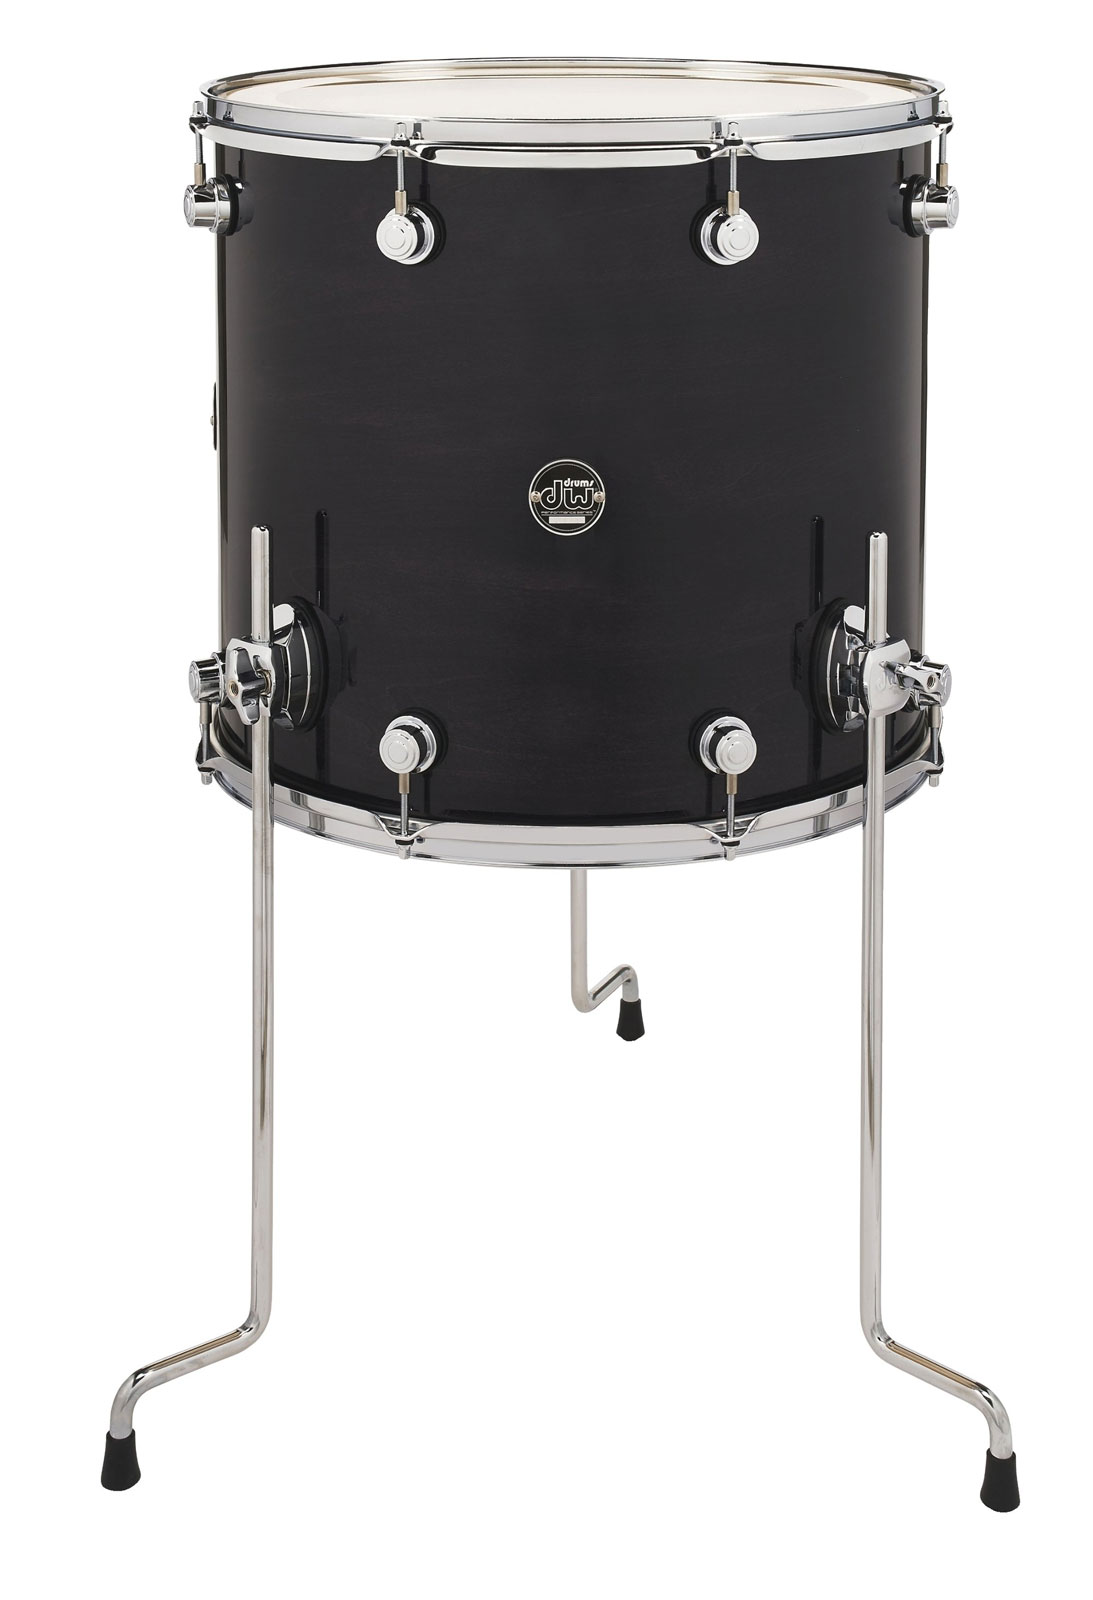 DW DRUM WORKSHOP TOM PERFORMANCE LACQUER EBONY STAIN